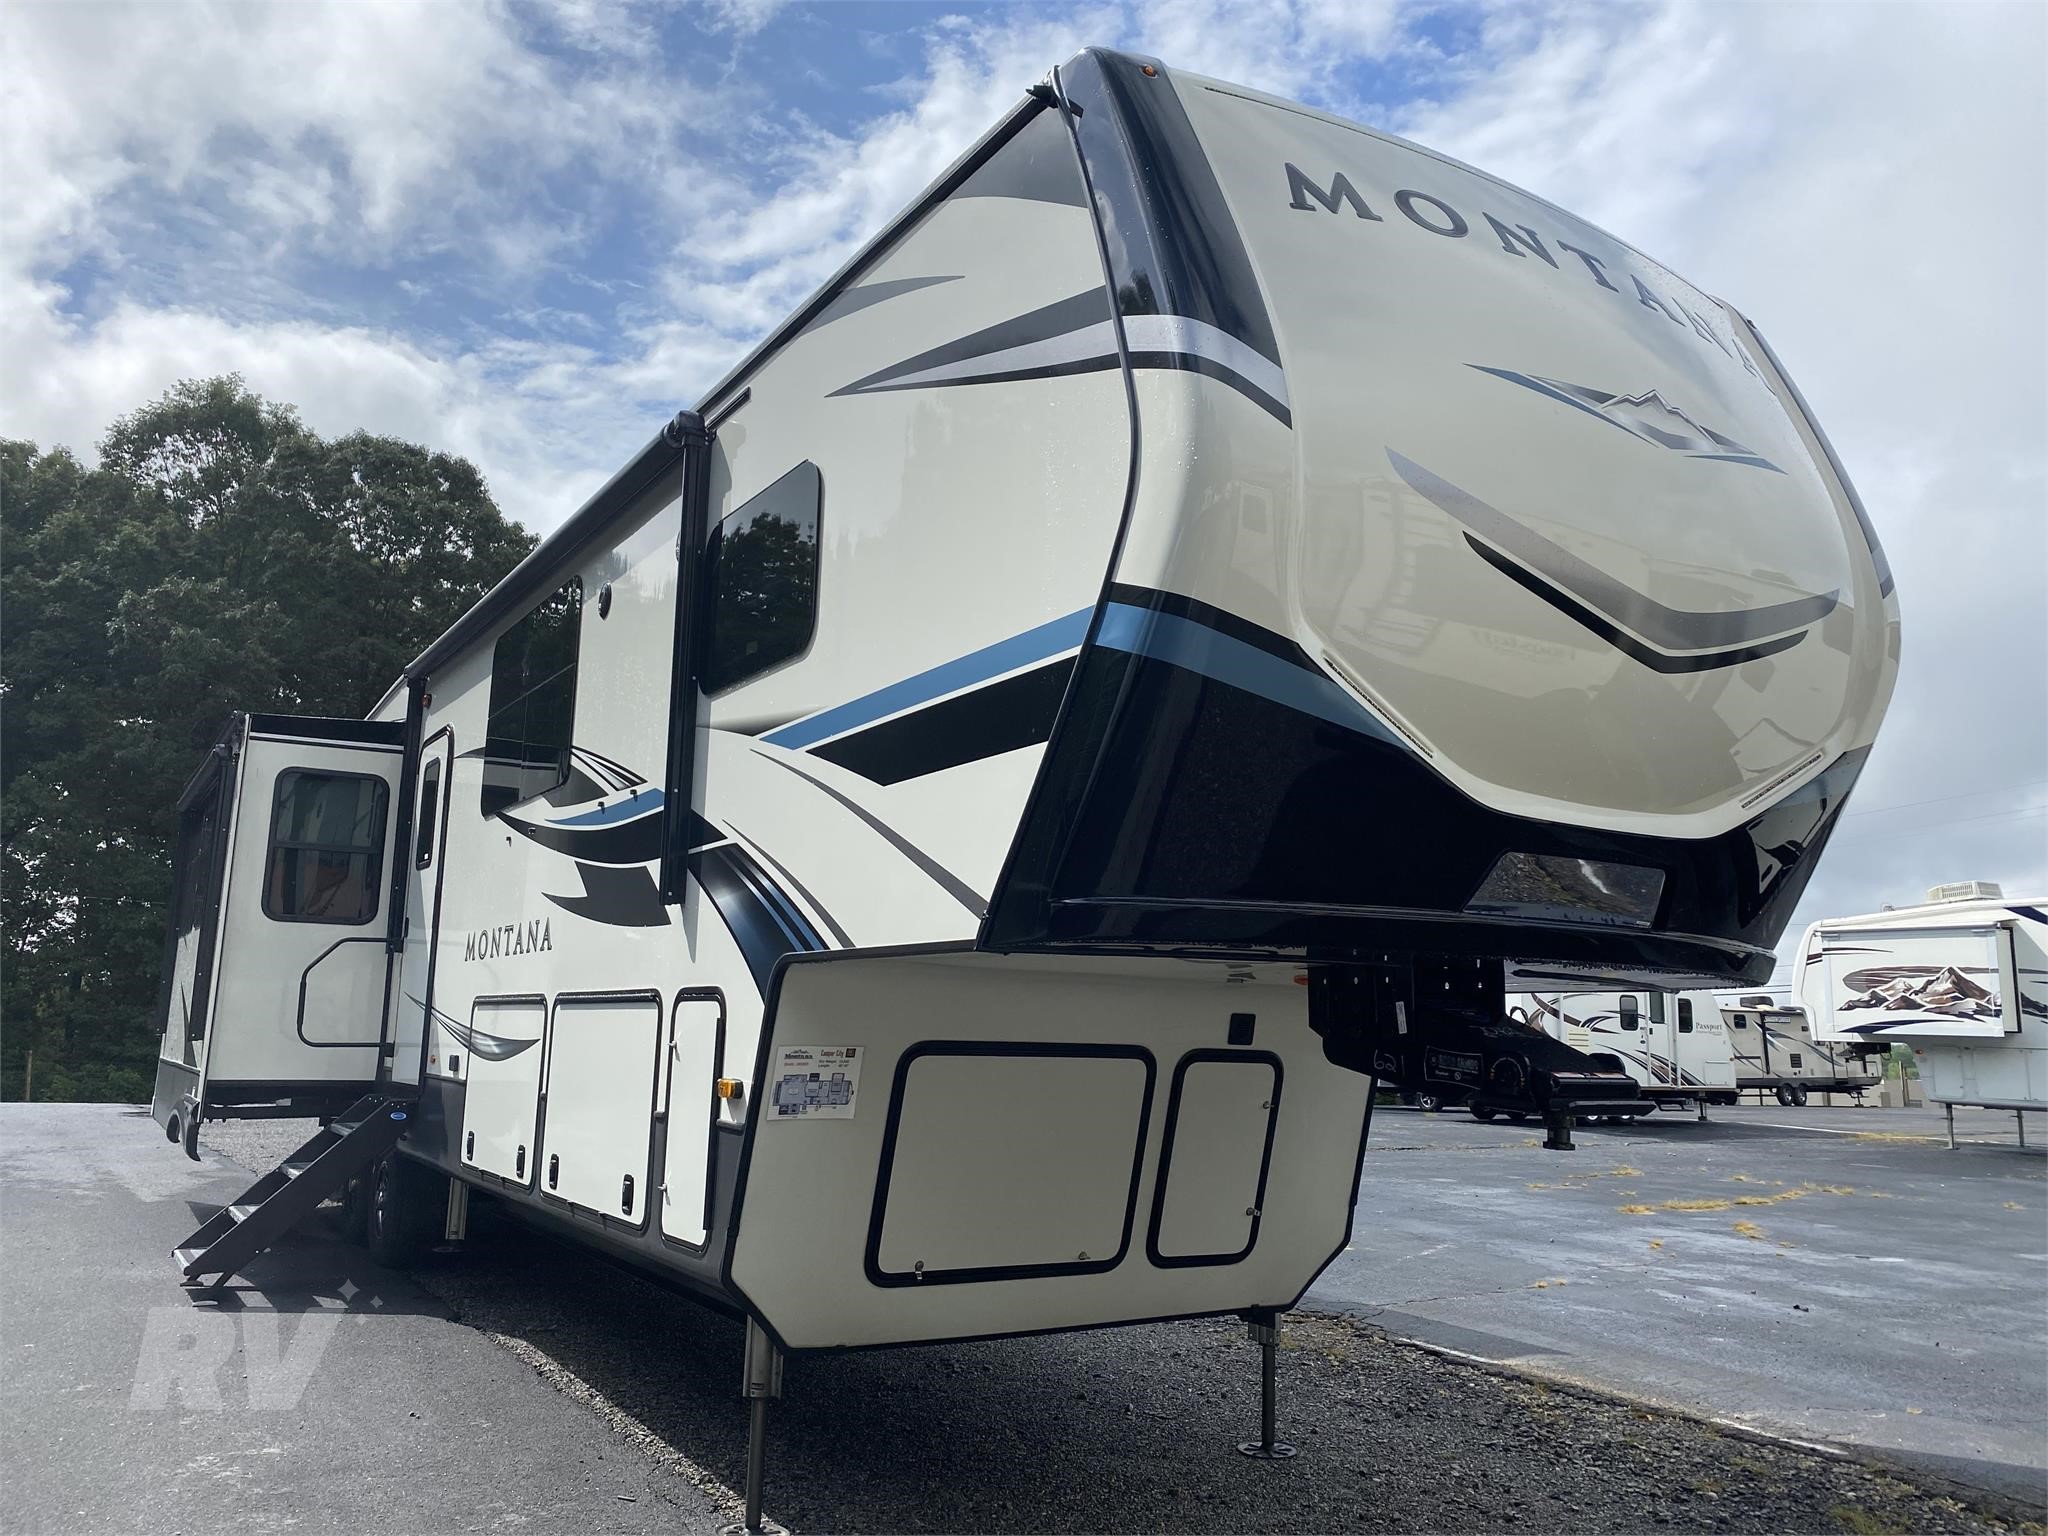 2021 KEYSTONE RV CO MONTANA 3855BR For Sale in Buford,